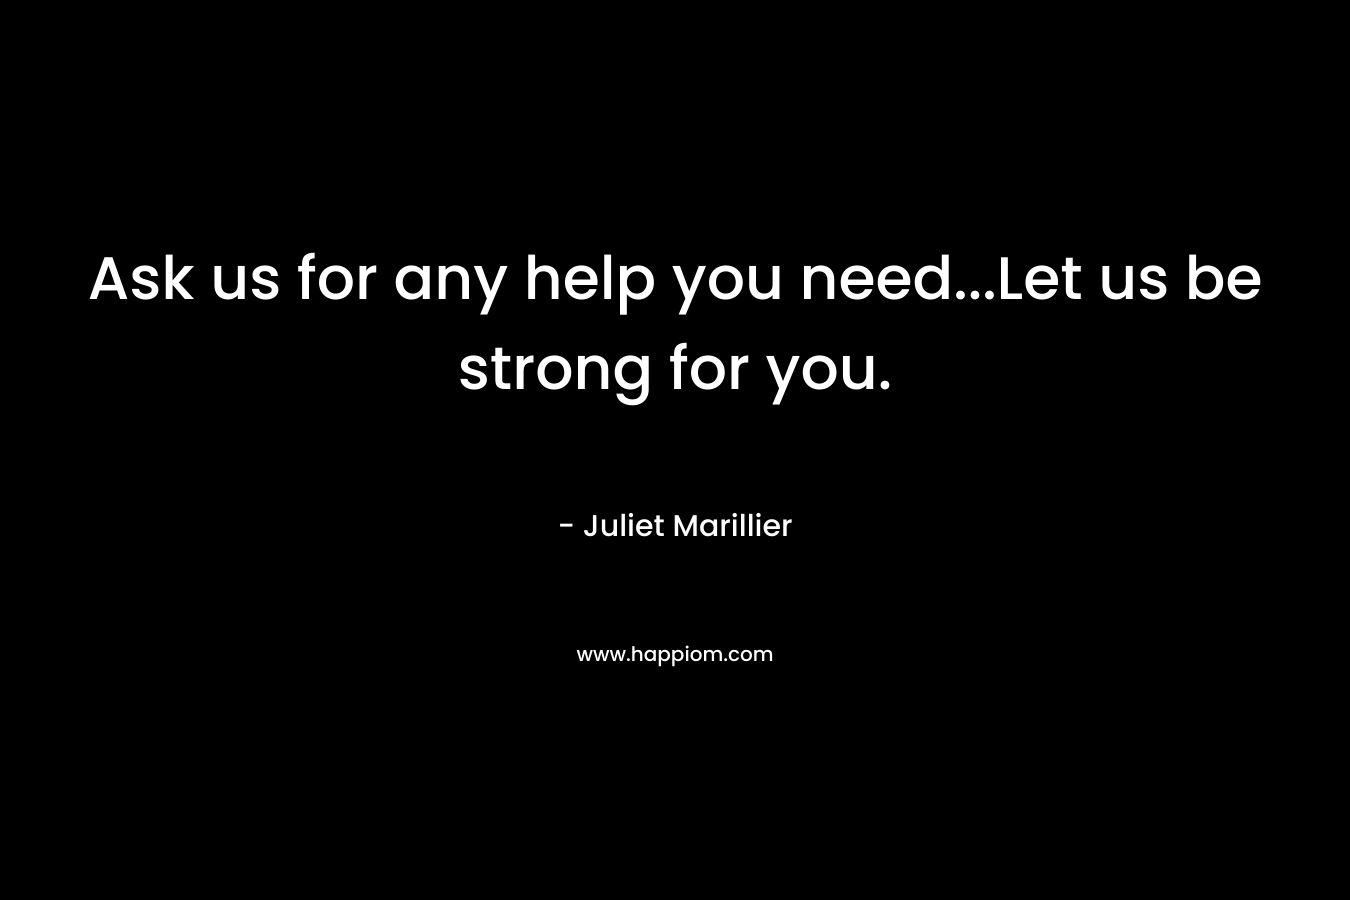 Ask us for any help you need...Let us be strong for you.